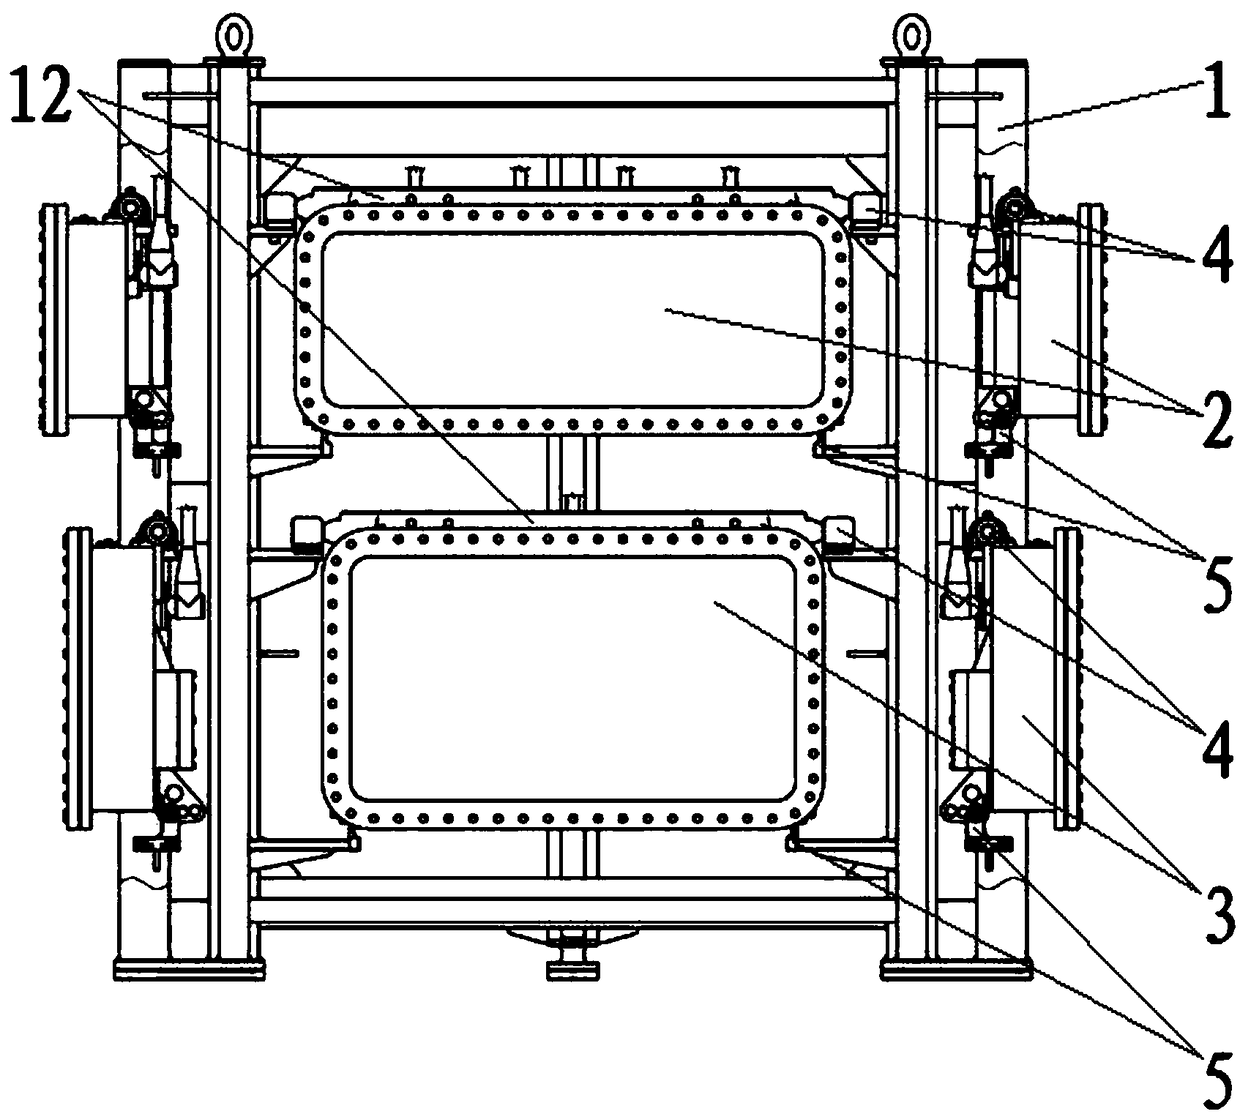 A wall-mounted equipment installation frame with pitch adjustment function